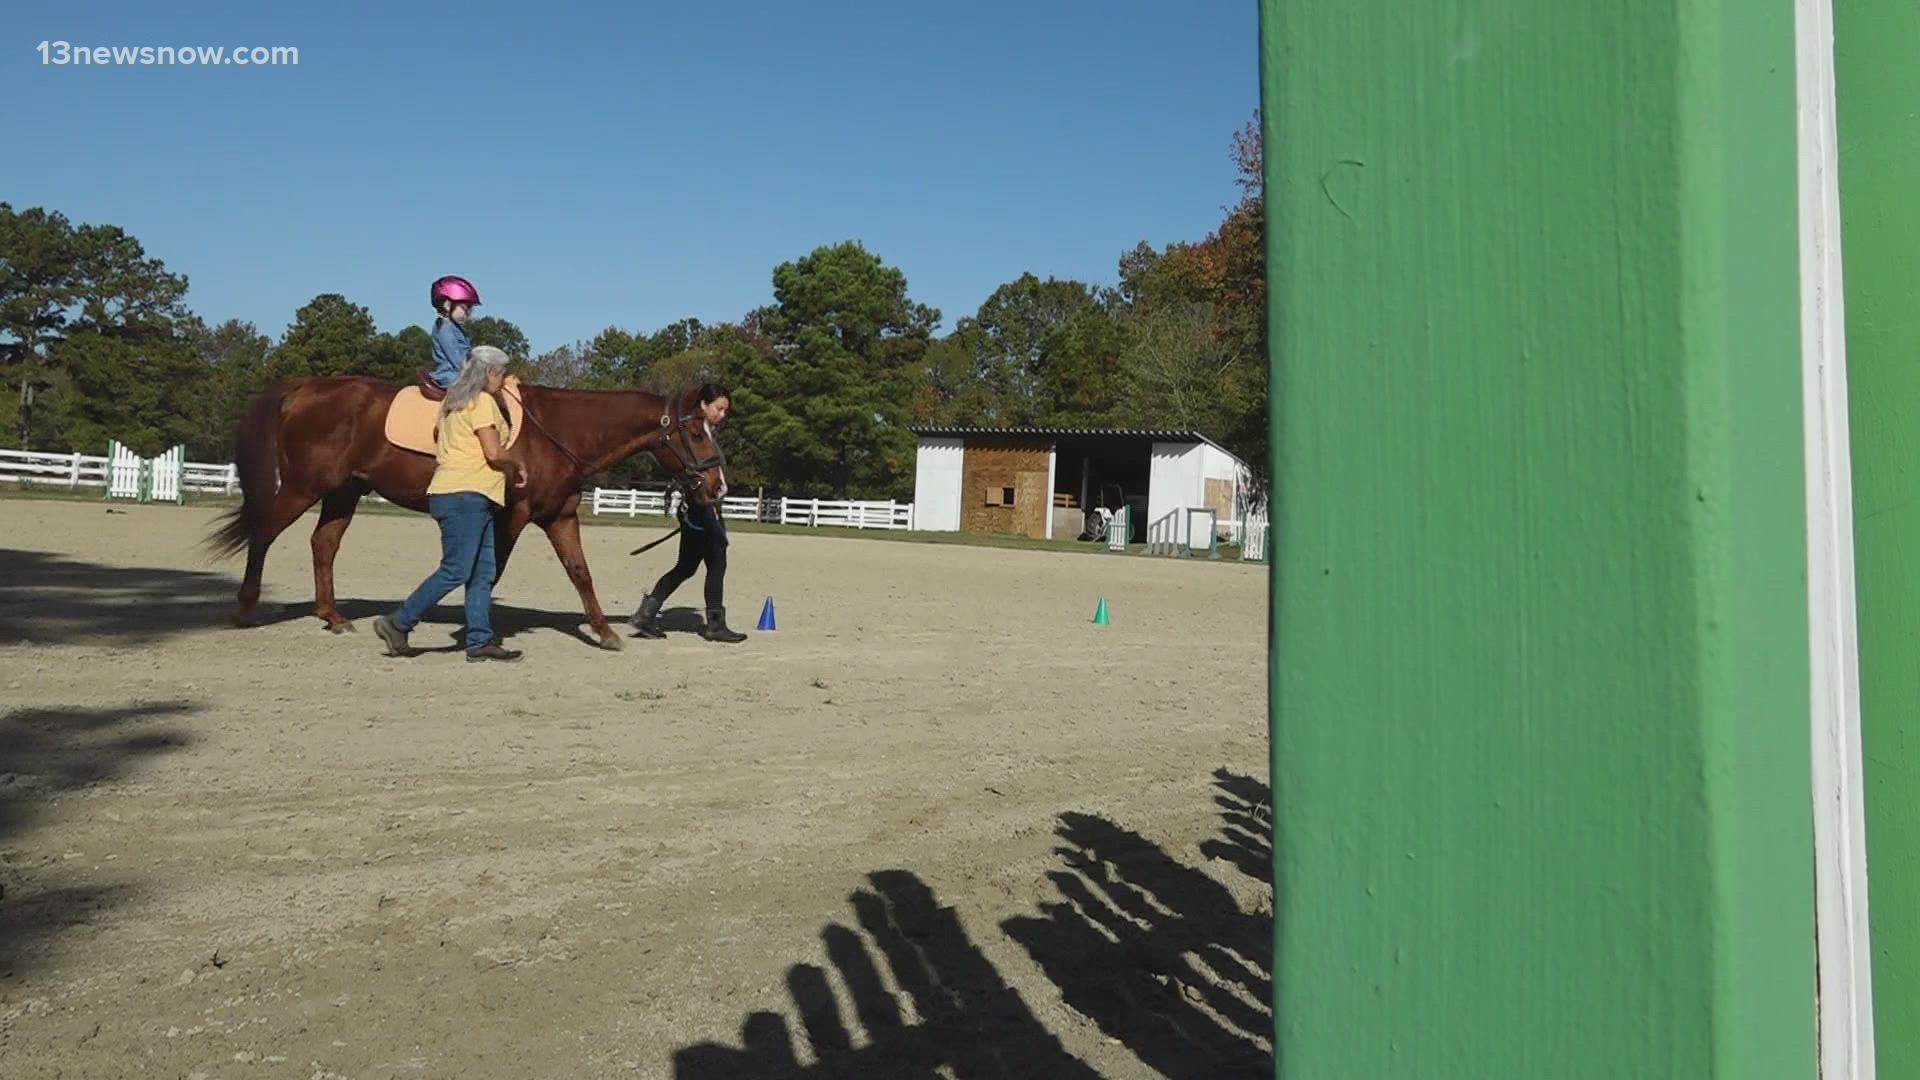 Friends and family of people with special needs say extraordinary things are happening through horseback riding therapy at Untamed Spirit in Virginia Beach.